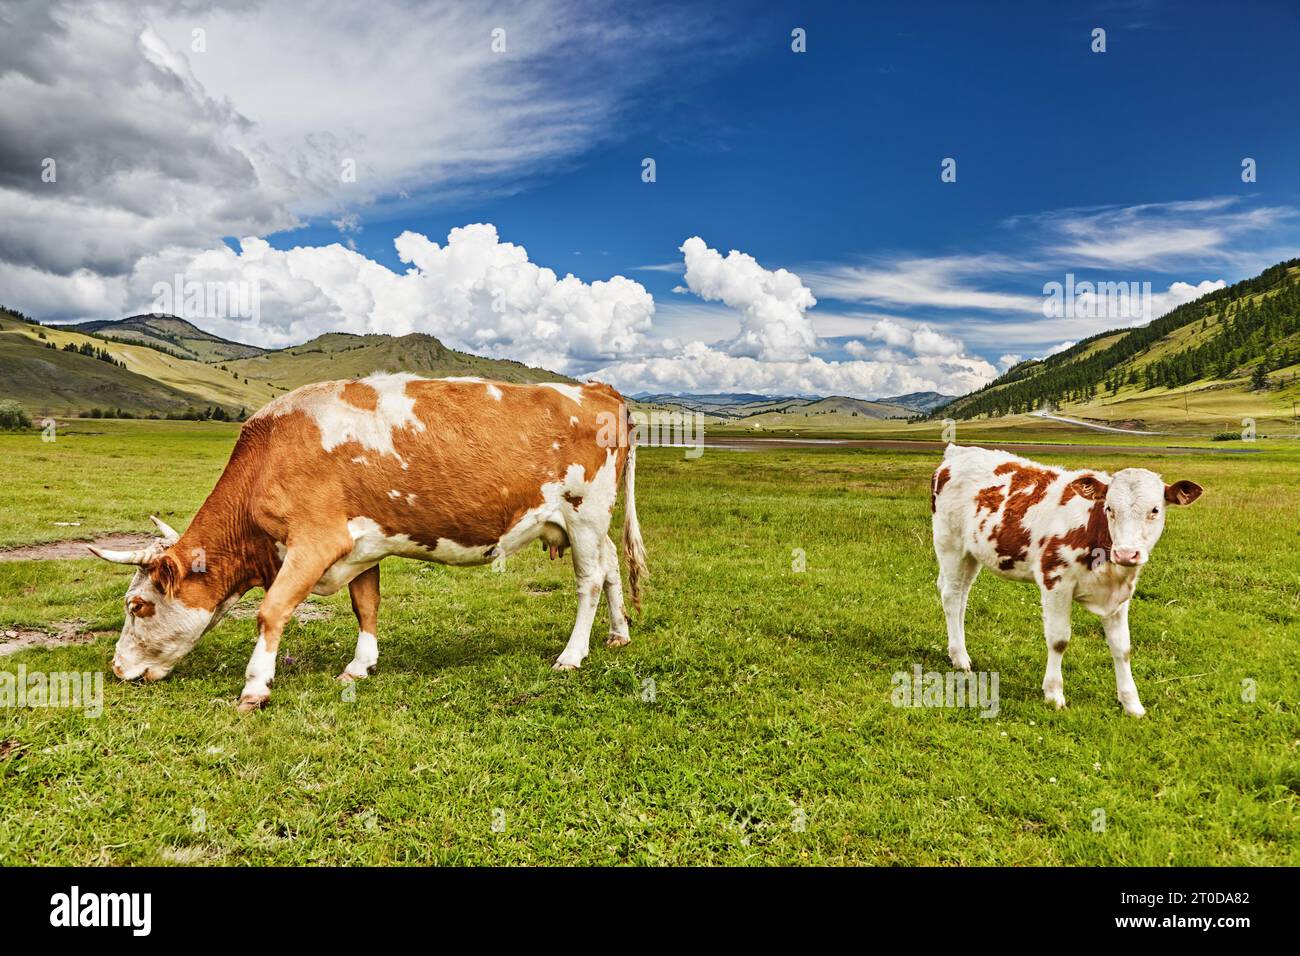 Pastoral landscape with grazing cows in a mountain valley Stock Photo